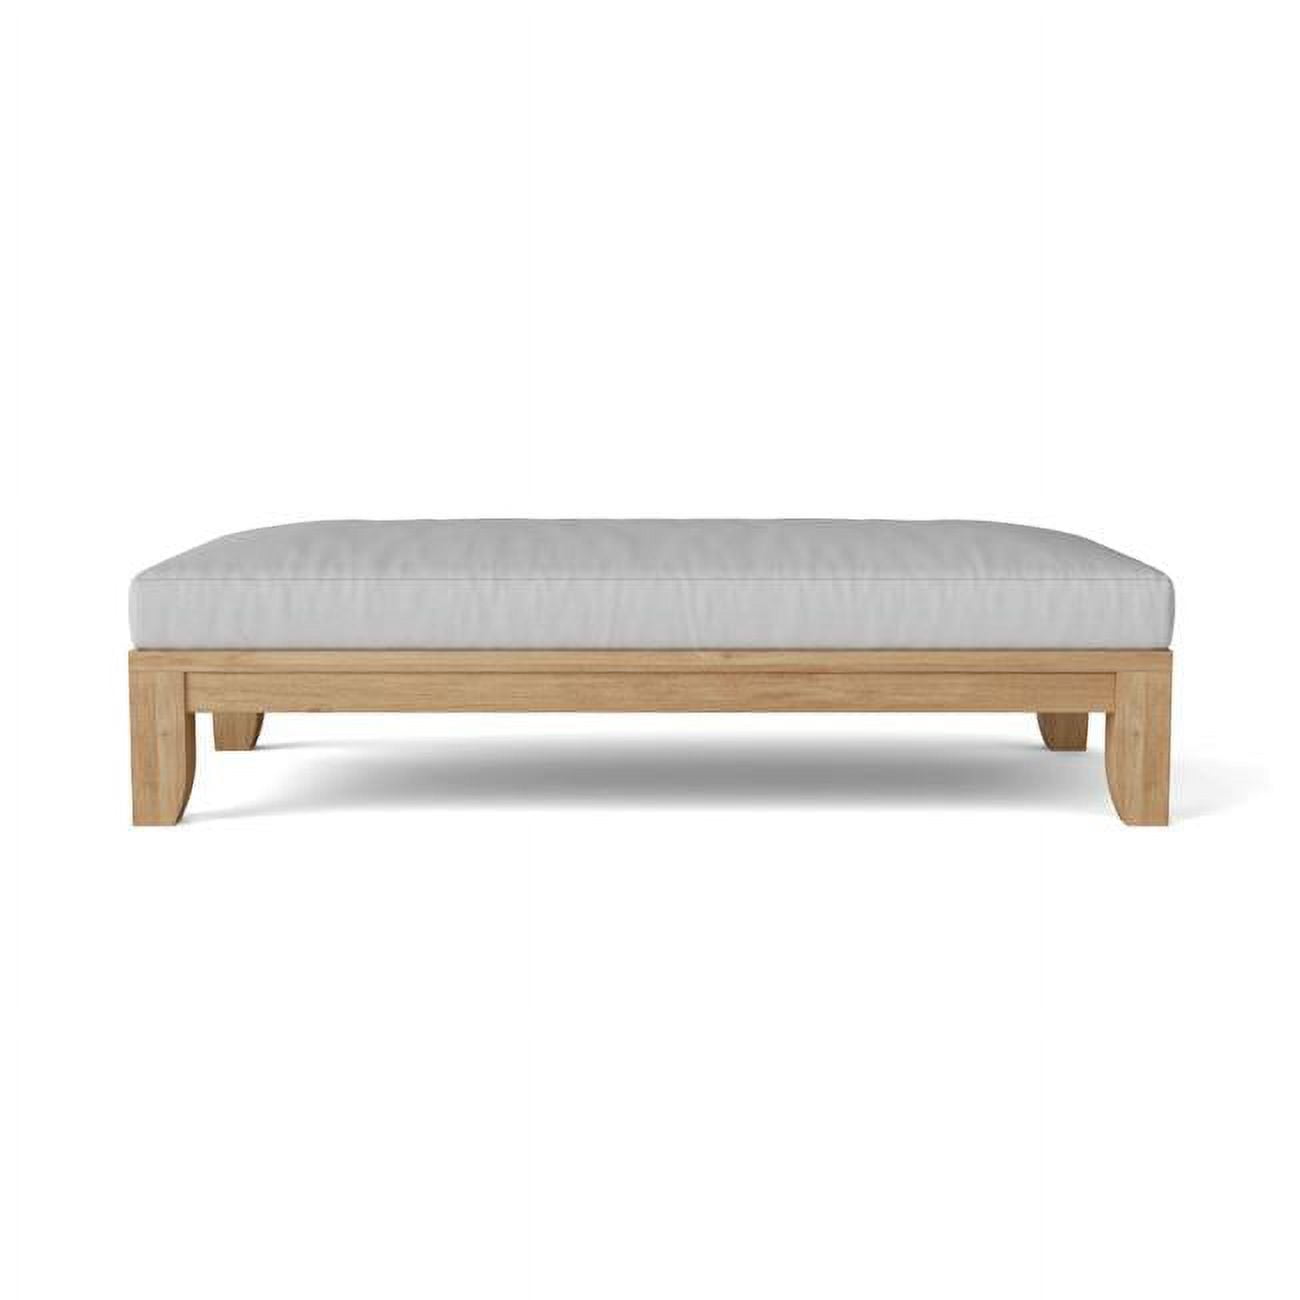 Picture of Anderson Teak DS-609 60 in. Riviera Daybed